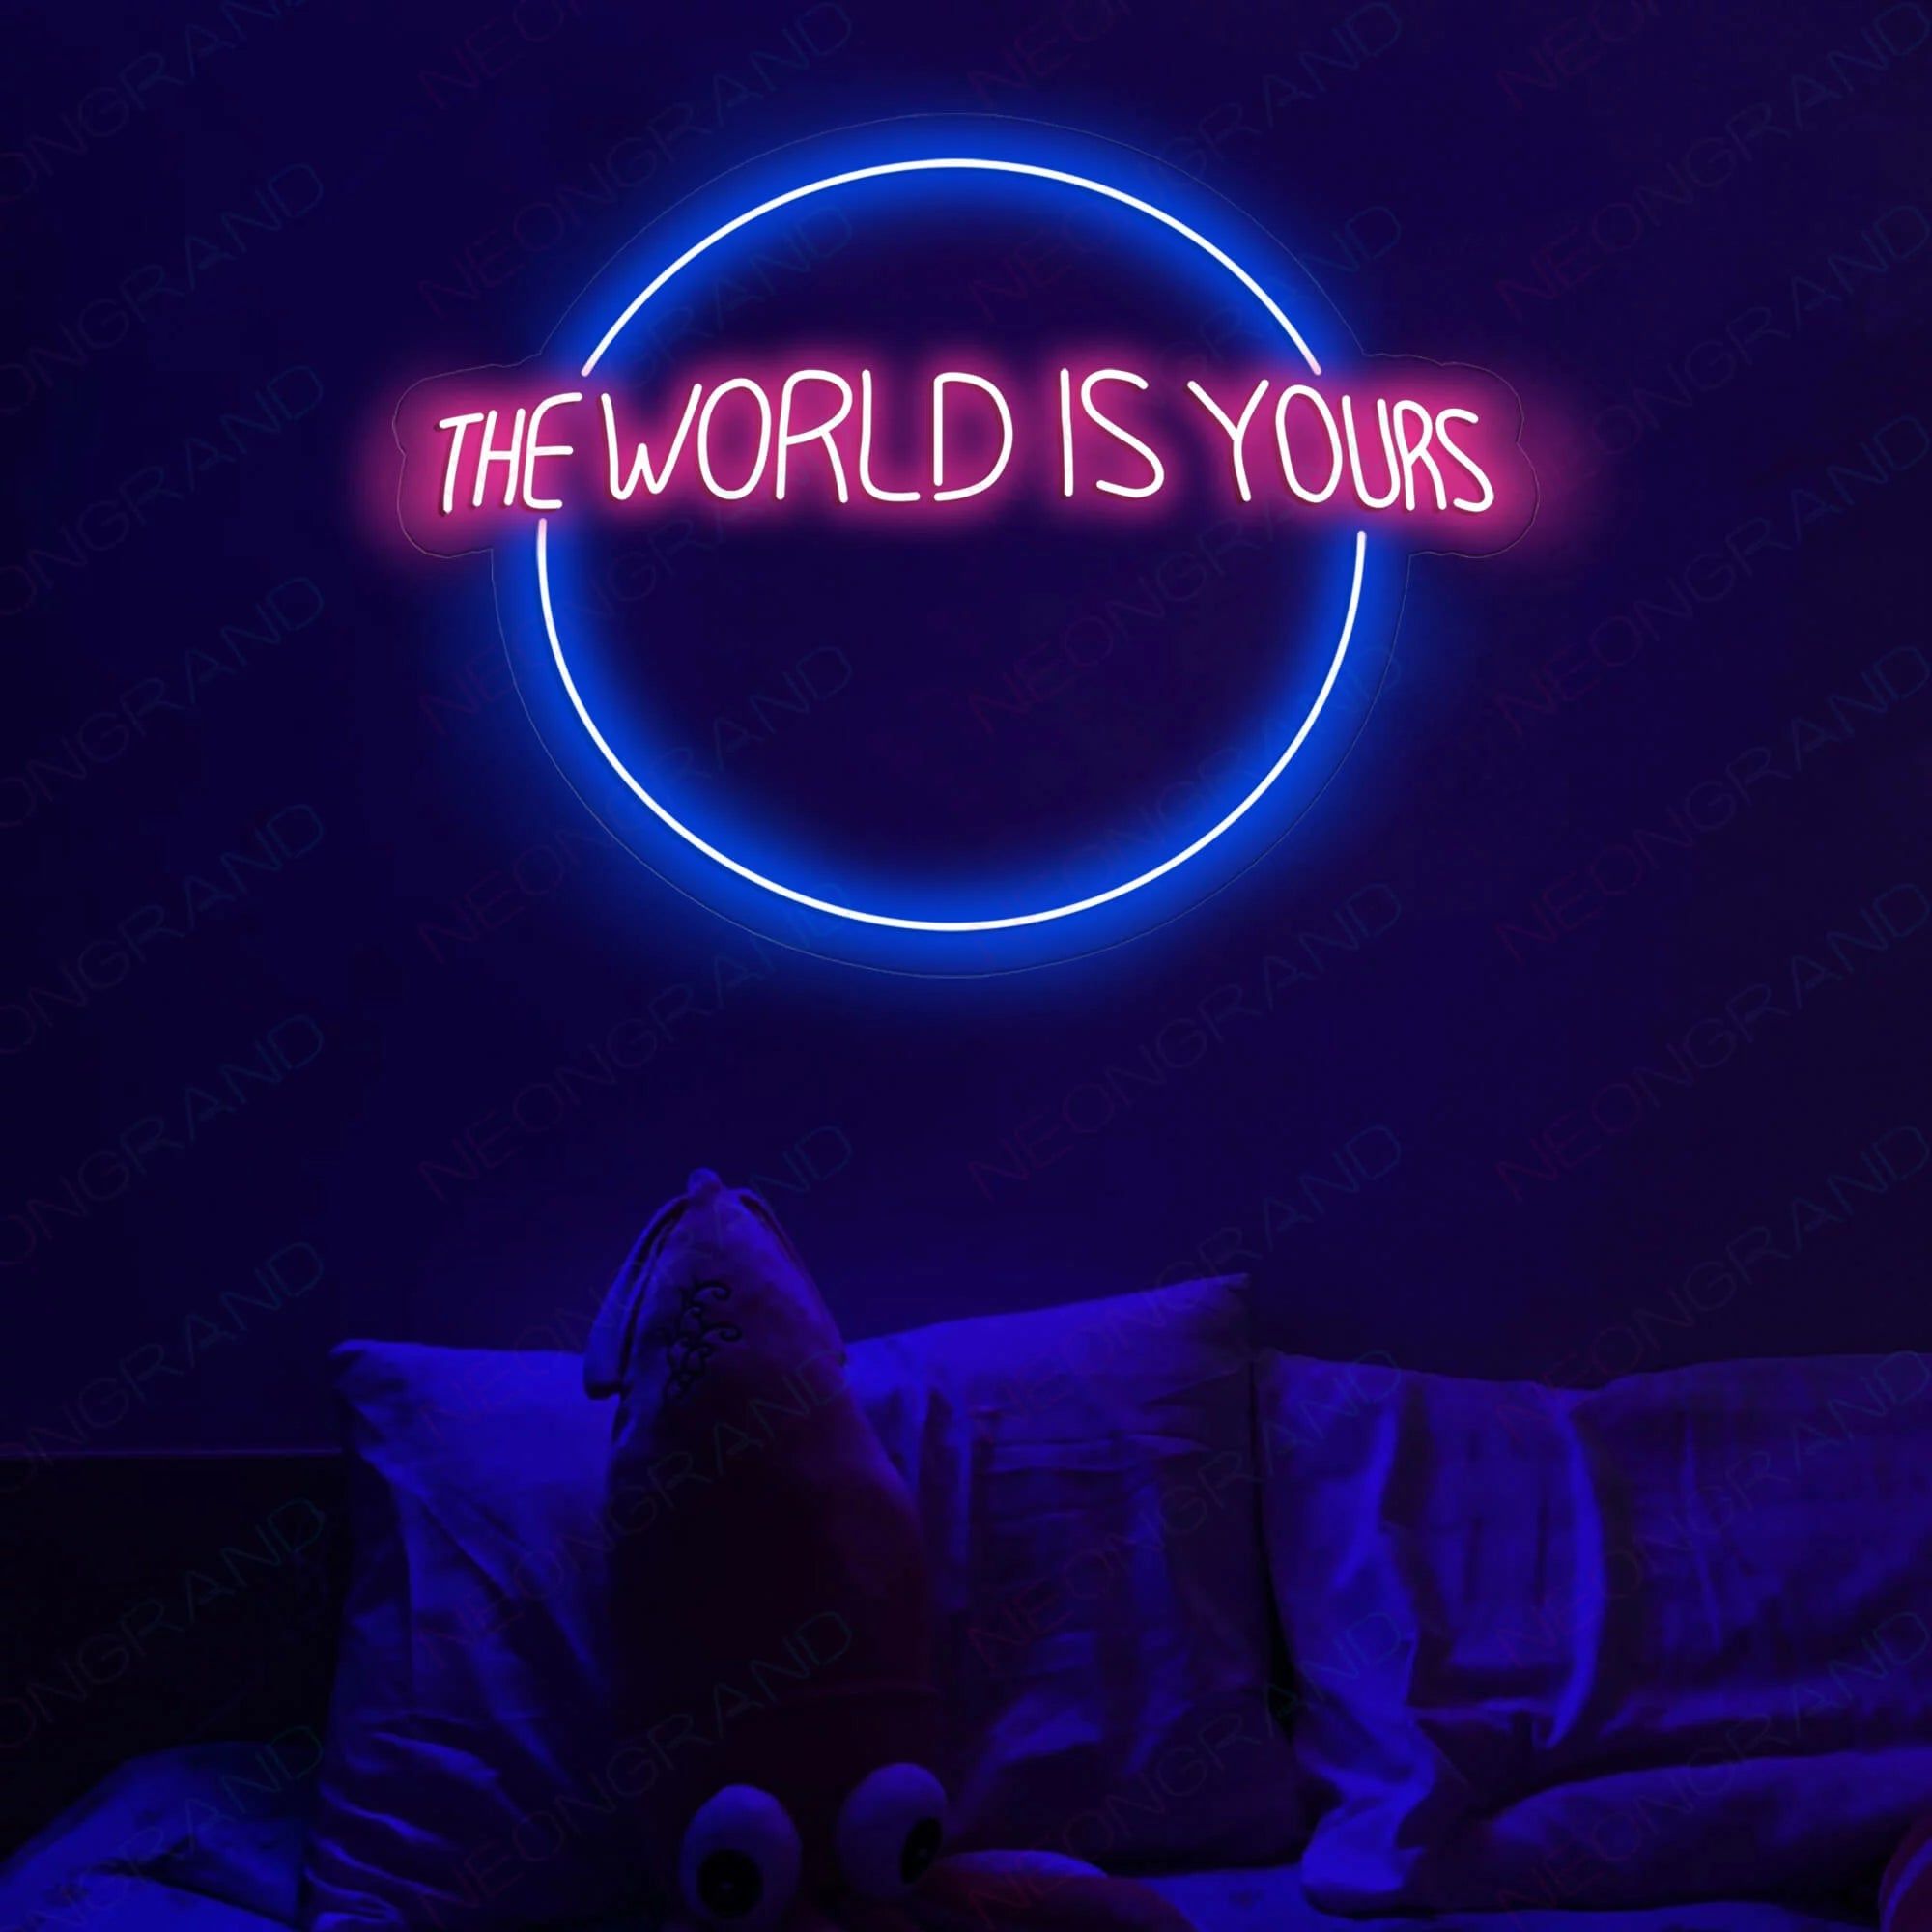 The world is yours neon sign - Dark blue, neon blue